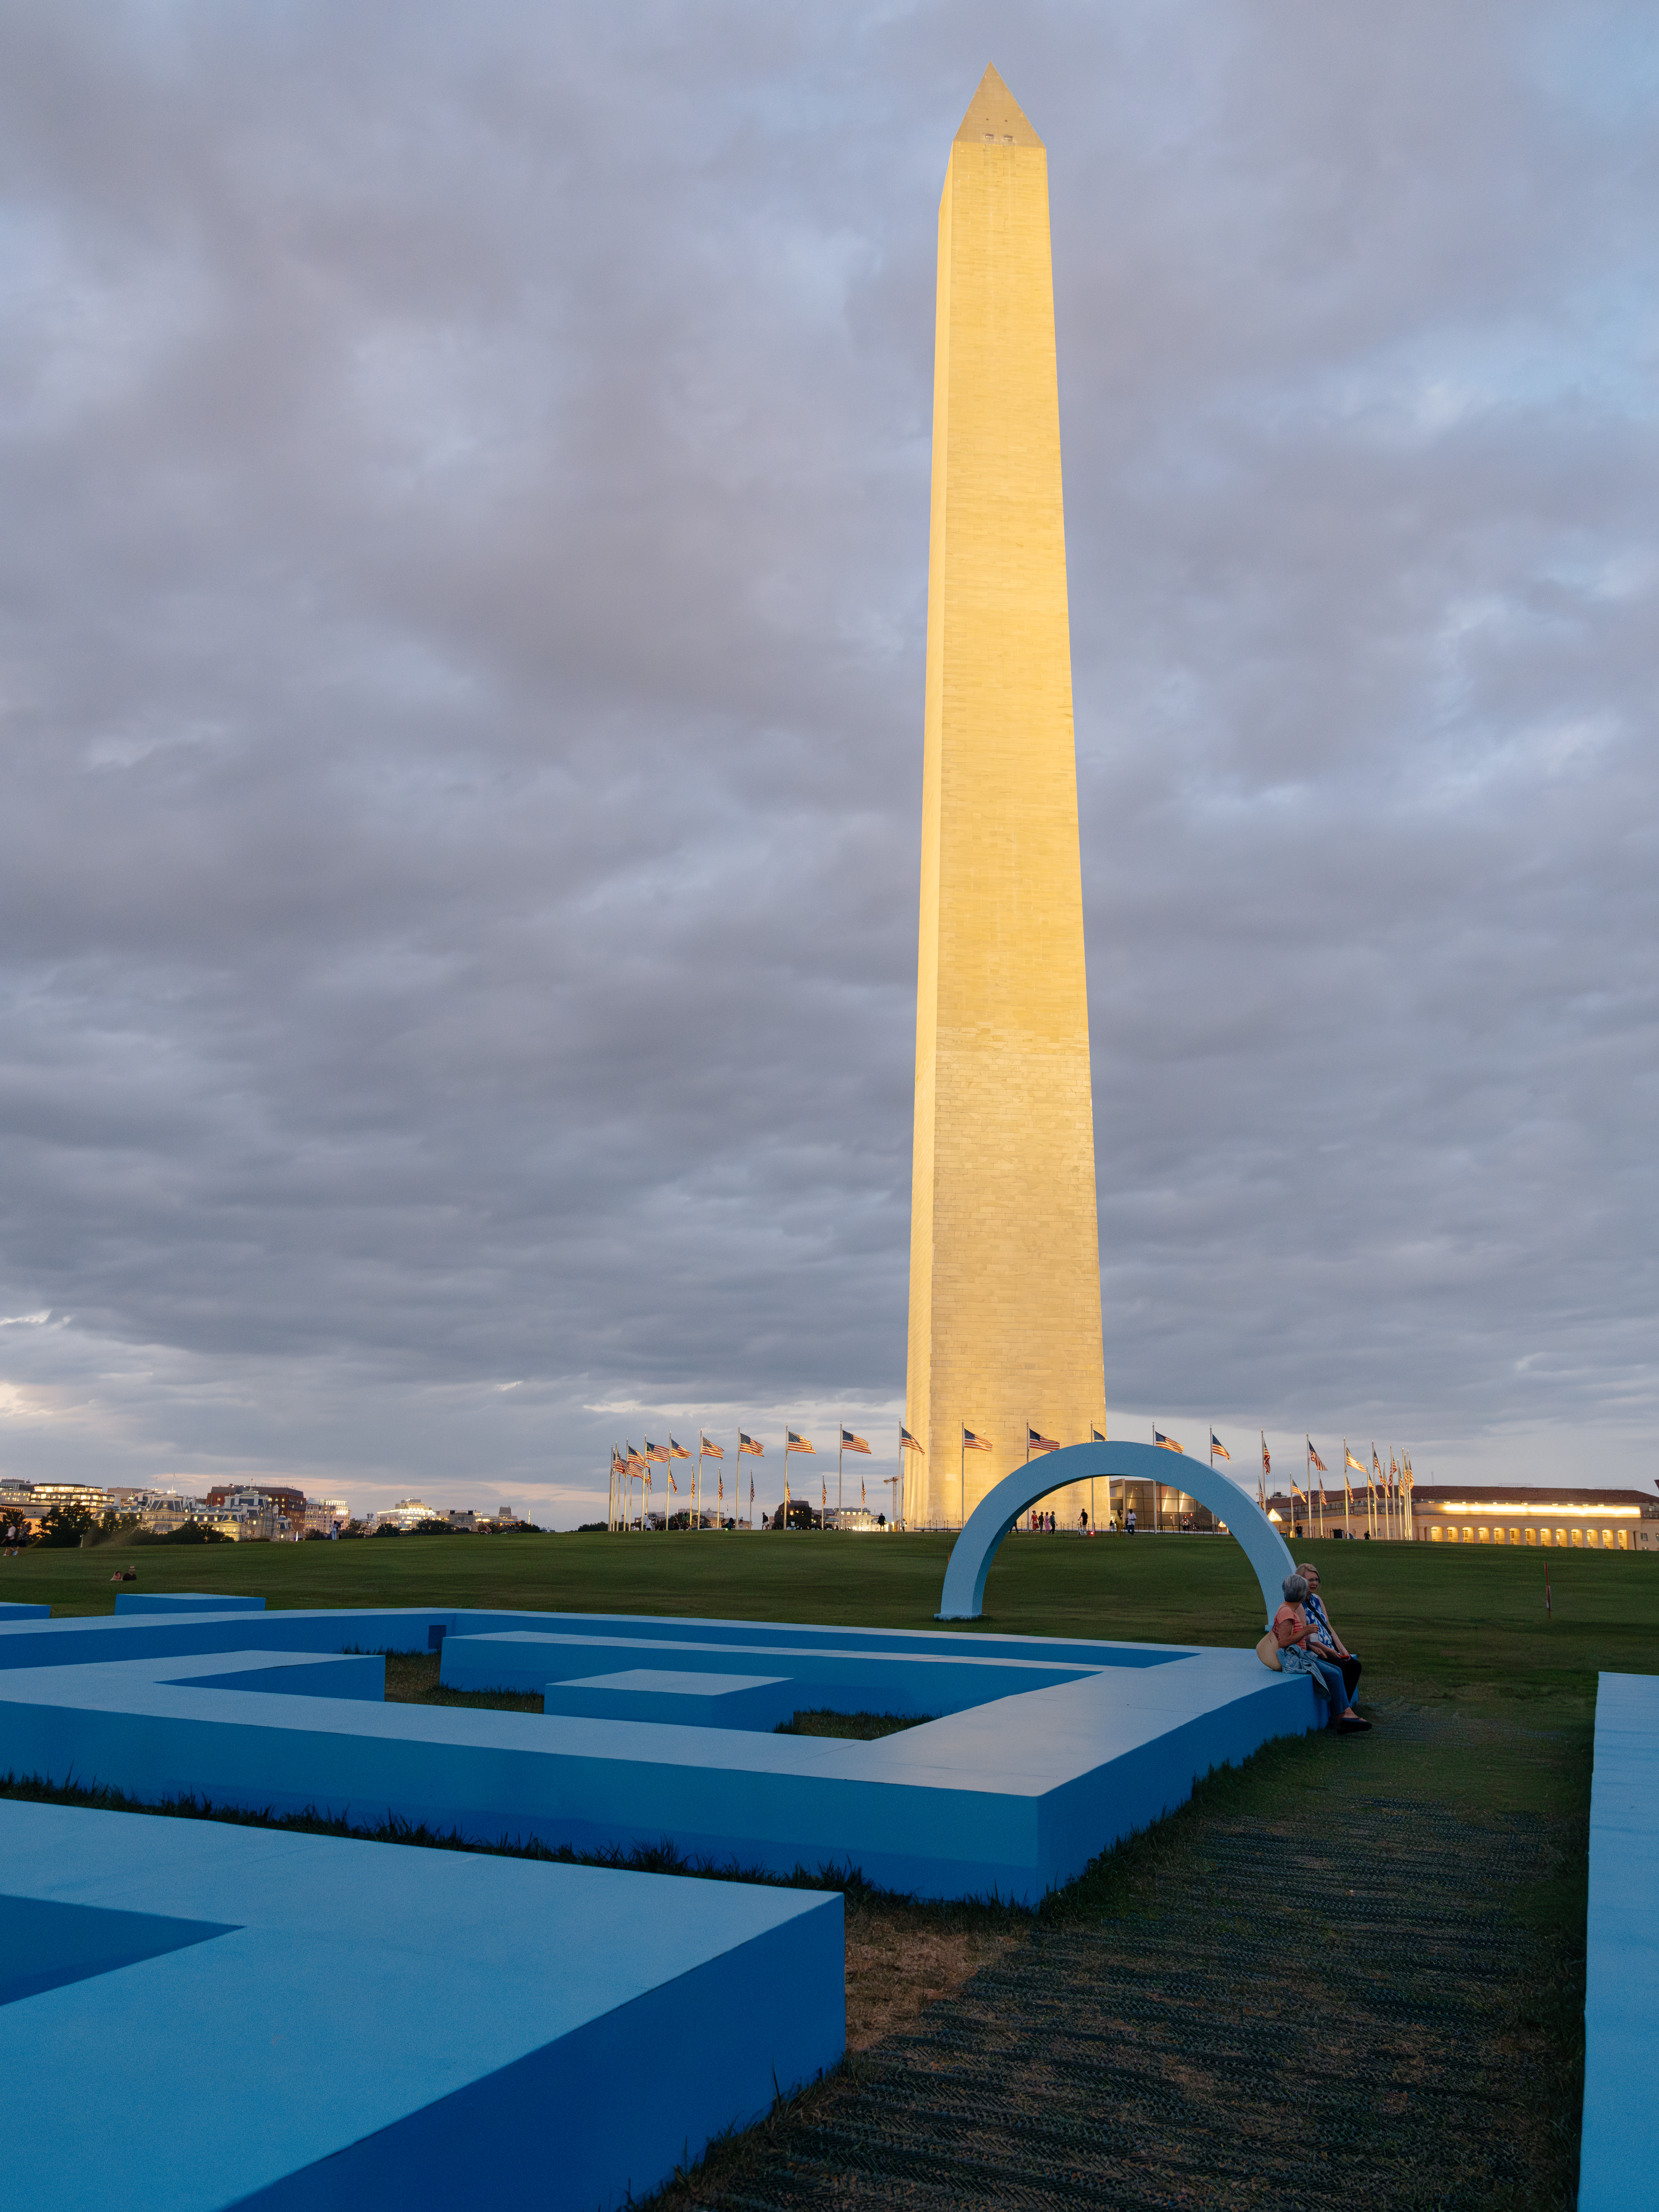 The Washington Monument at sunset overlooking a group of blue sculptures sitting on the ground beneath it